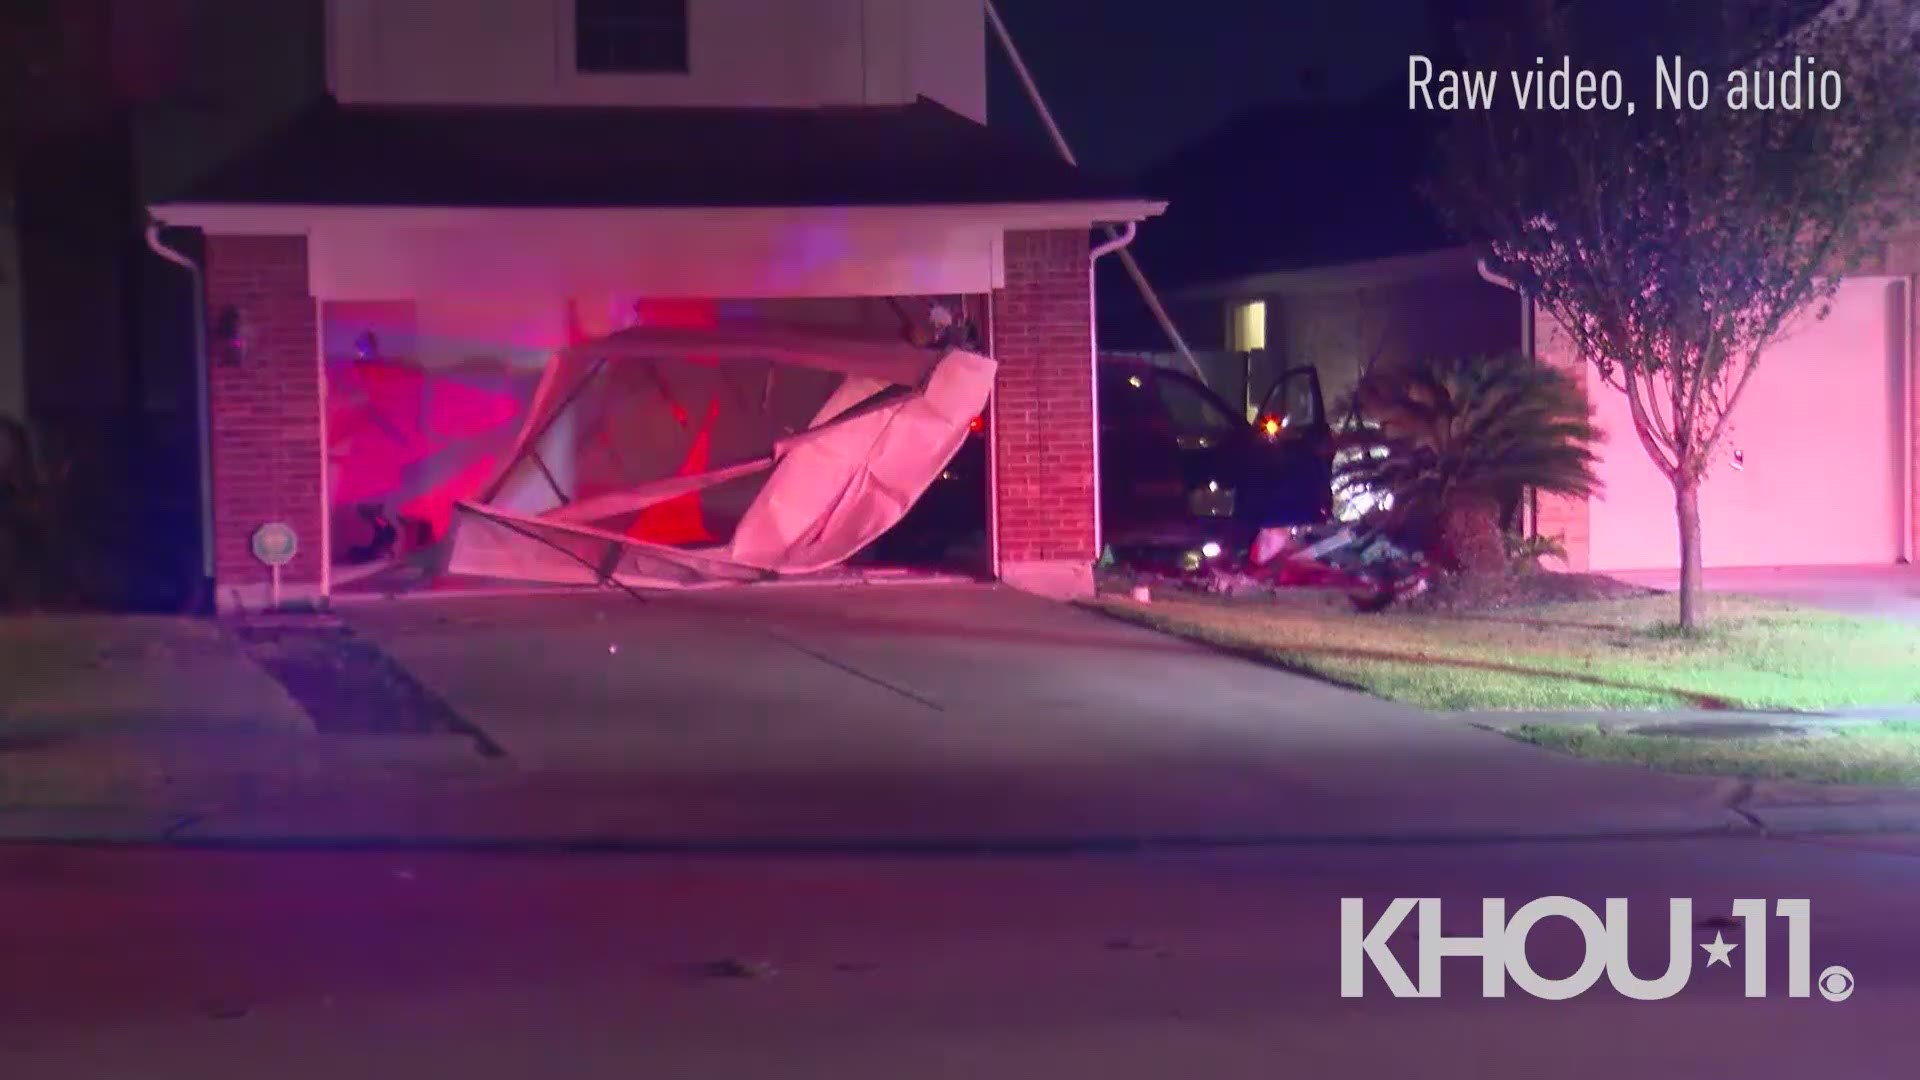 Deputies say a SUV driver crashed through a home's garage and wall, hitting a neighboring home. The crash happened in the 11100 block of Lori Brook in northwest Harris County early Tuesday.